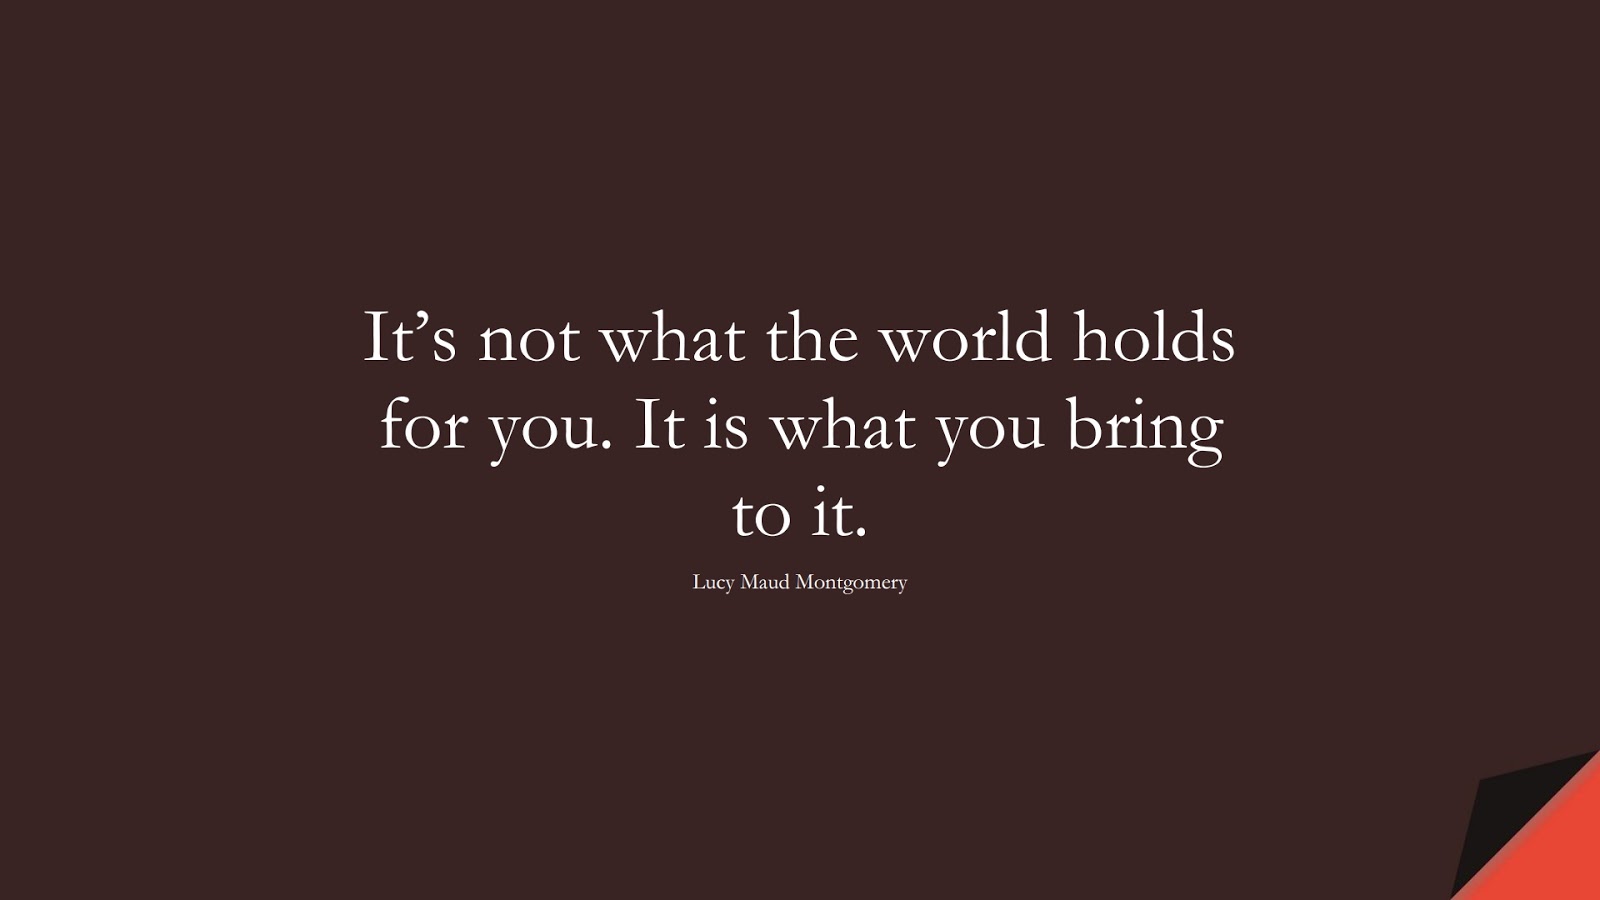 It’s not what the world holds for you. It is what you bring to it. (Lucy Maud Montgomery);  #BestQuotes